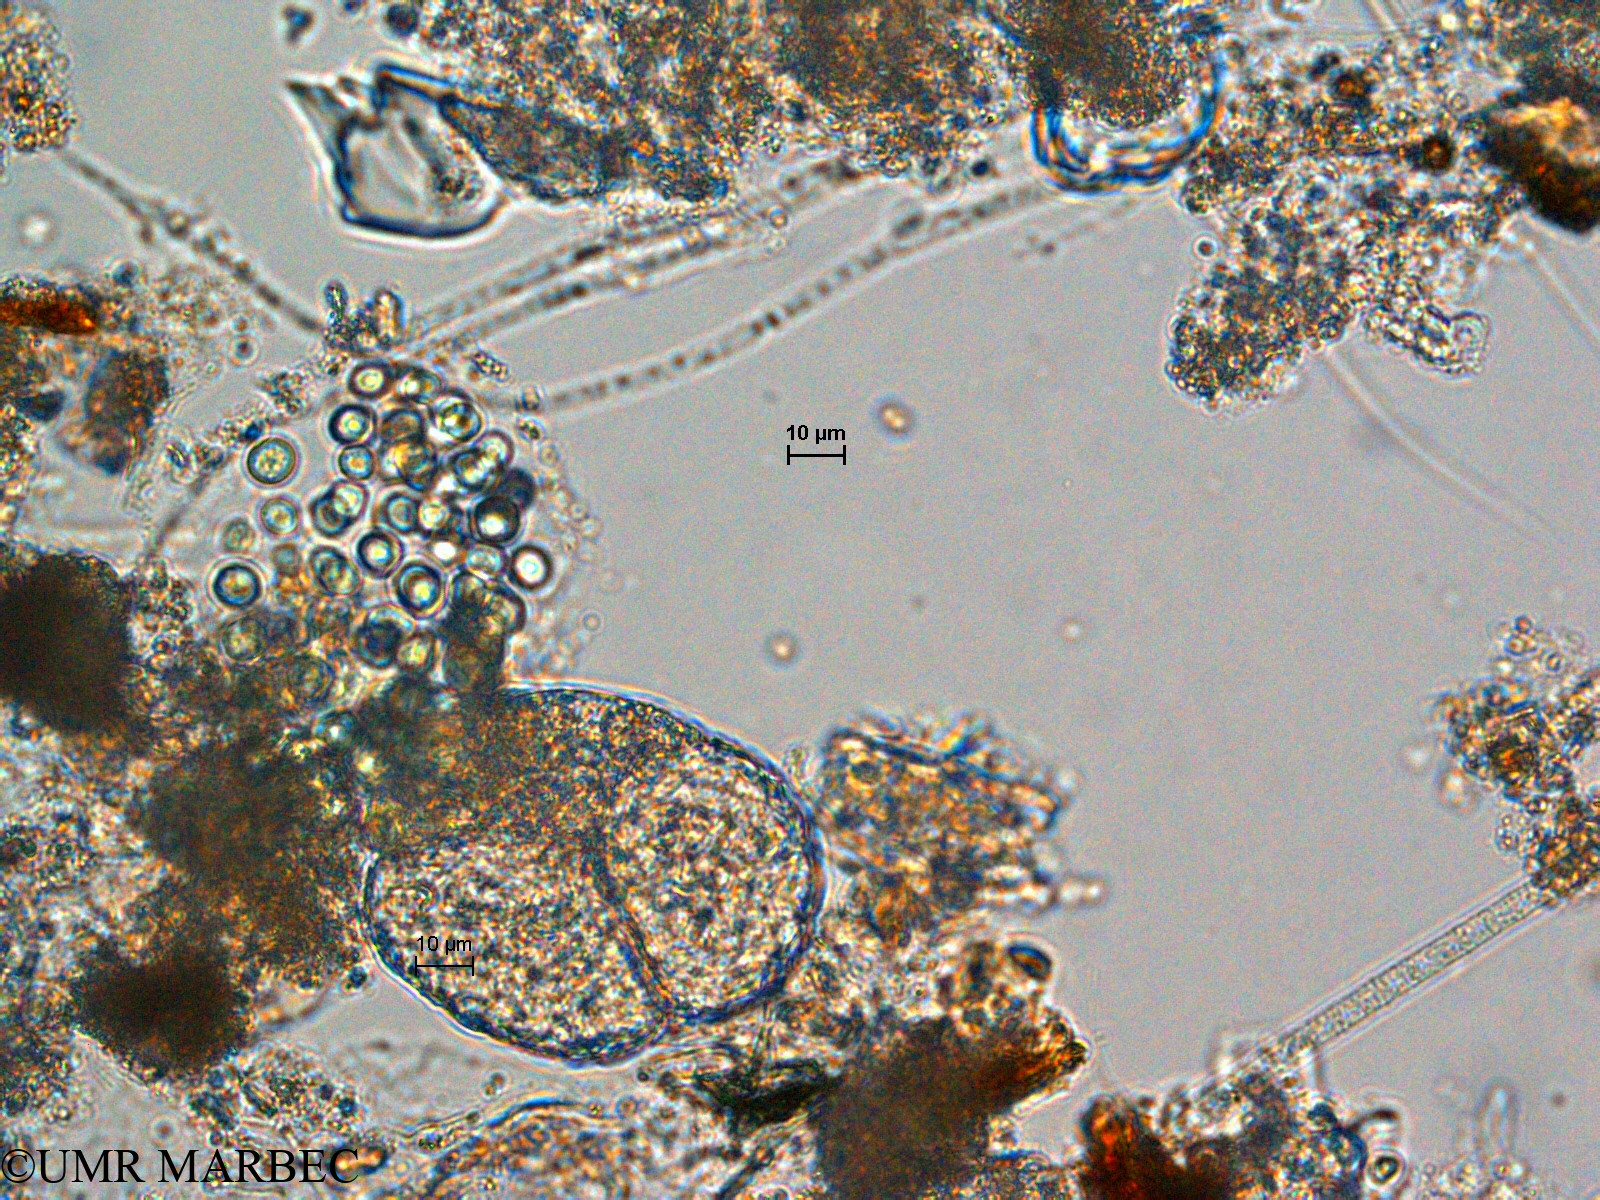 phyto/Scattered_Islands/europa/COMMA April 2011/Chroococcus sp9 (1)(copy).jpg